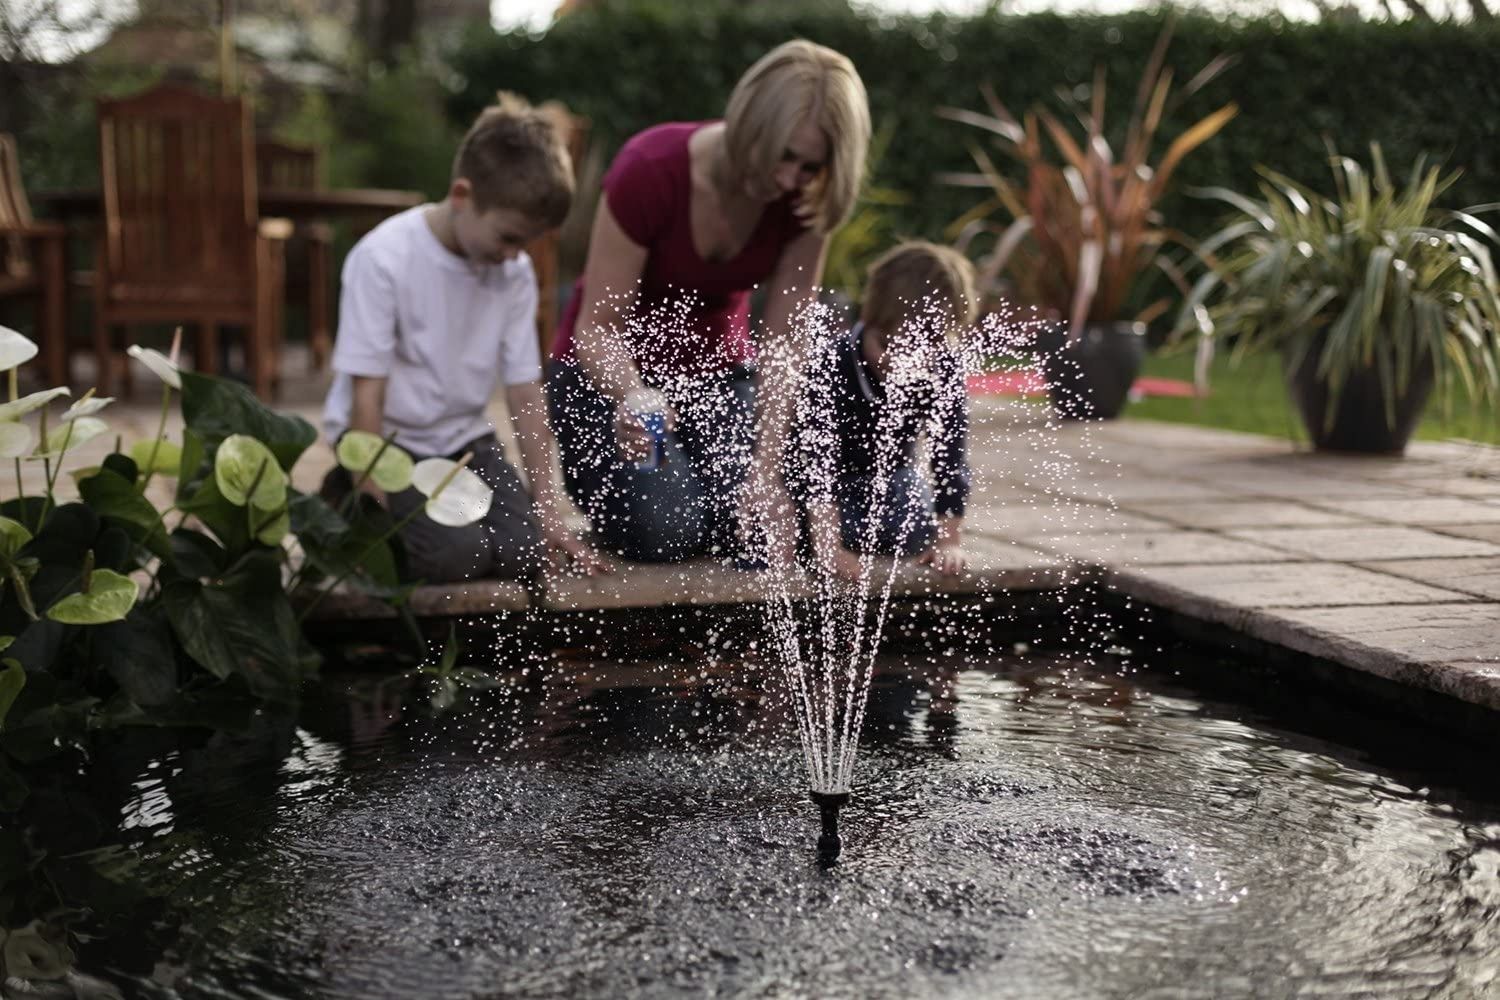 A young family peers into a manmade water feature while the best pond pump creates a small spray in the center of the water